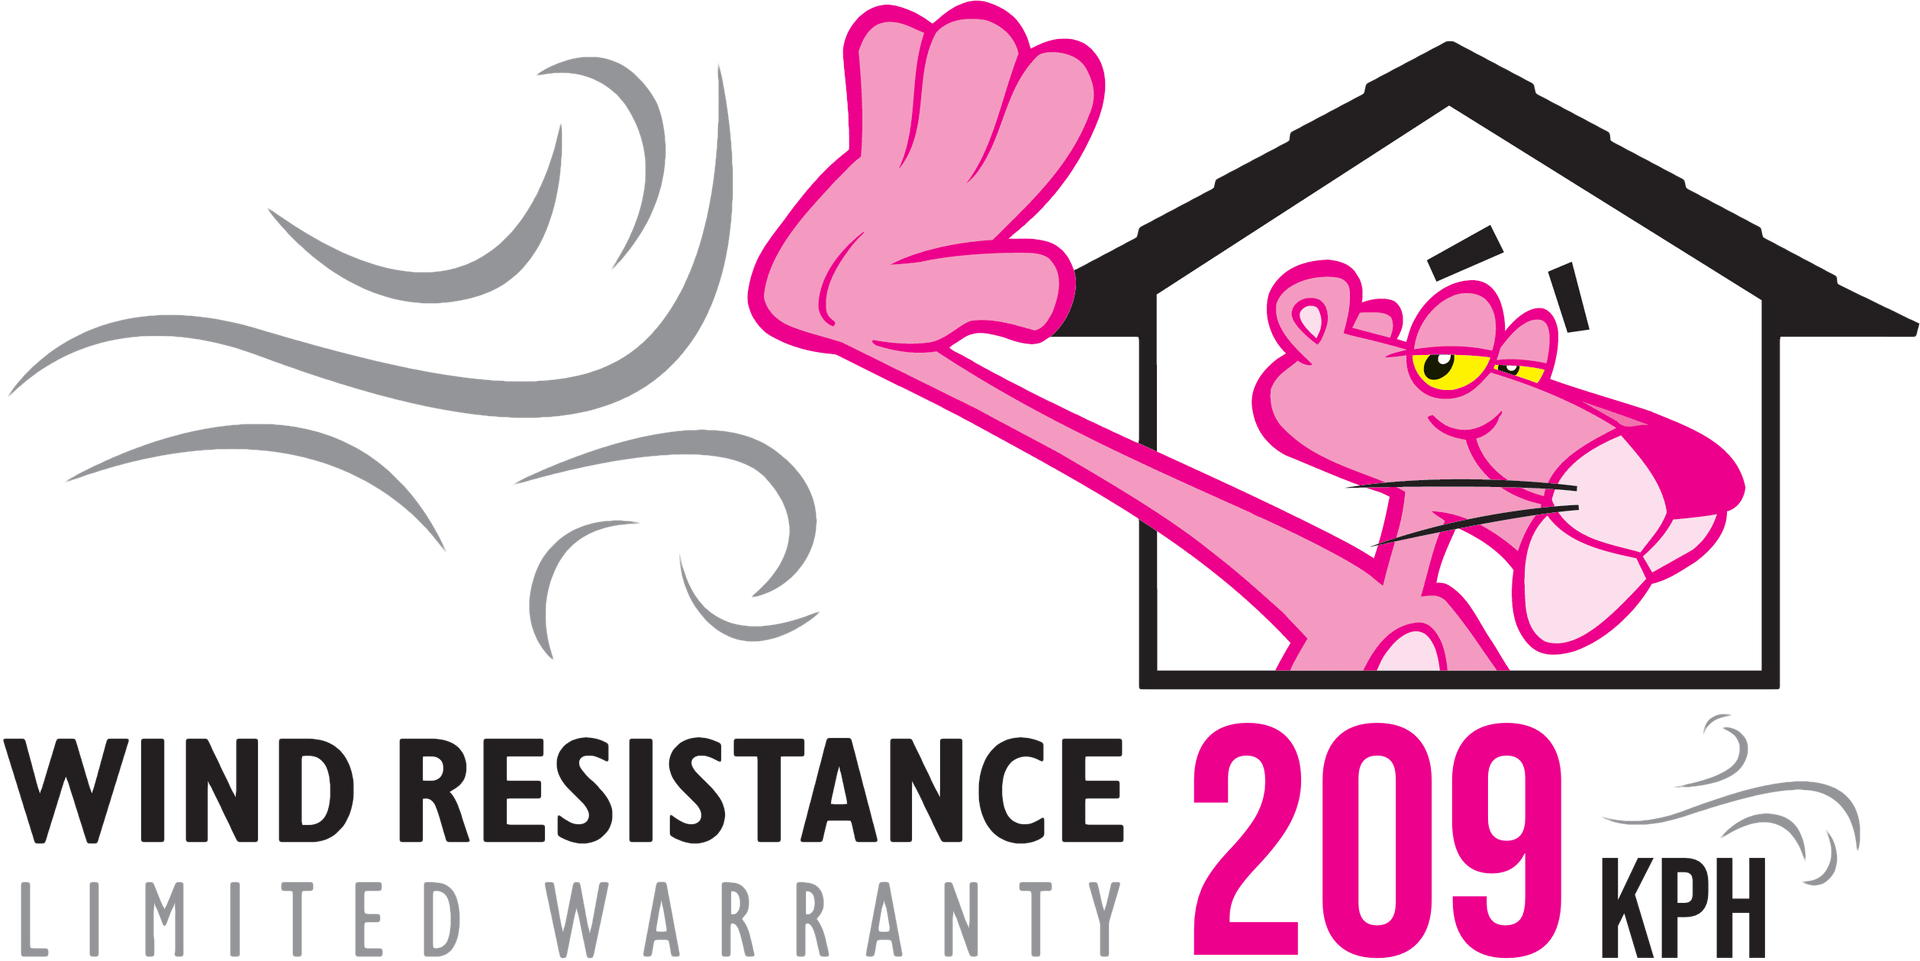 Owens Corning's Pink Panther Holding back wind. Showcasing residential asphalt roof shingle wind warranty coverage written at bottom